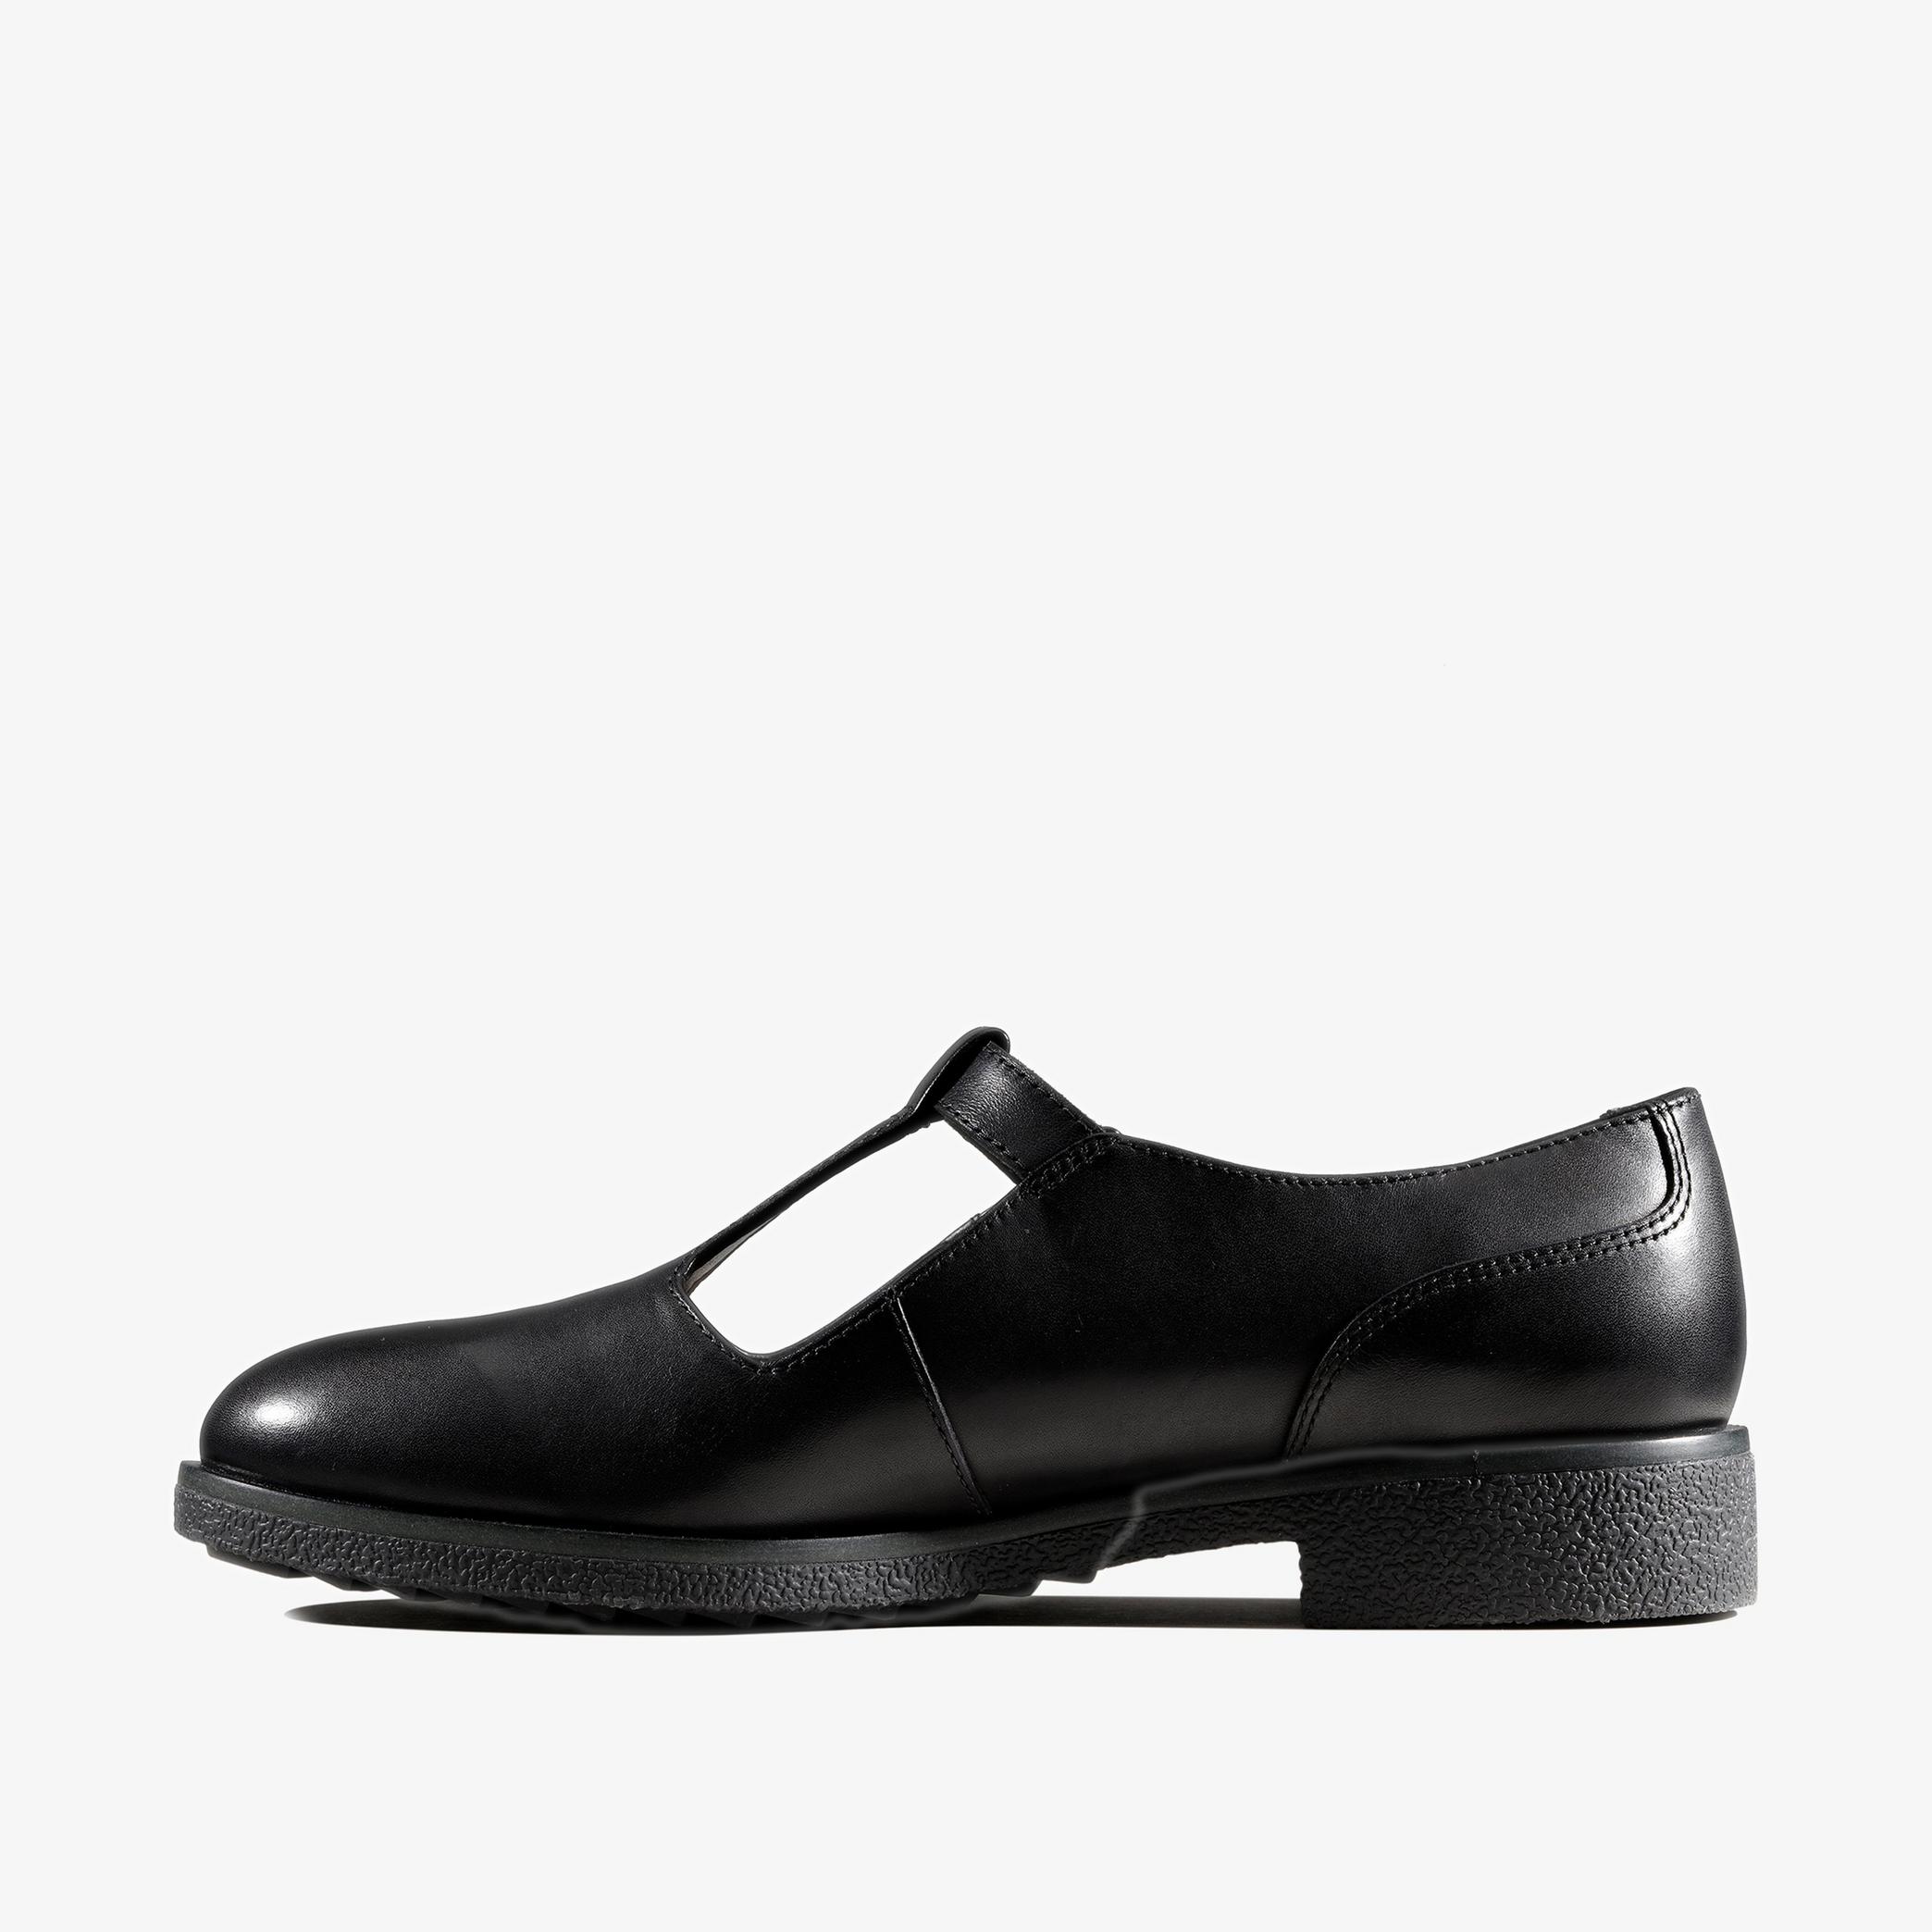 Griffin Town Black Leather T Bar Shoes, view 2 of 6